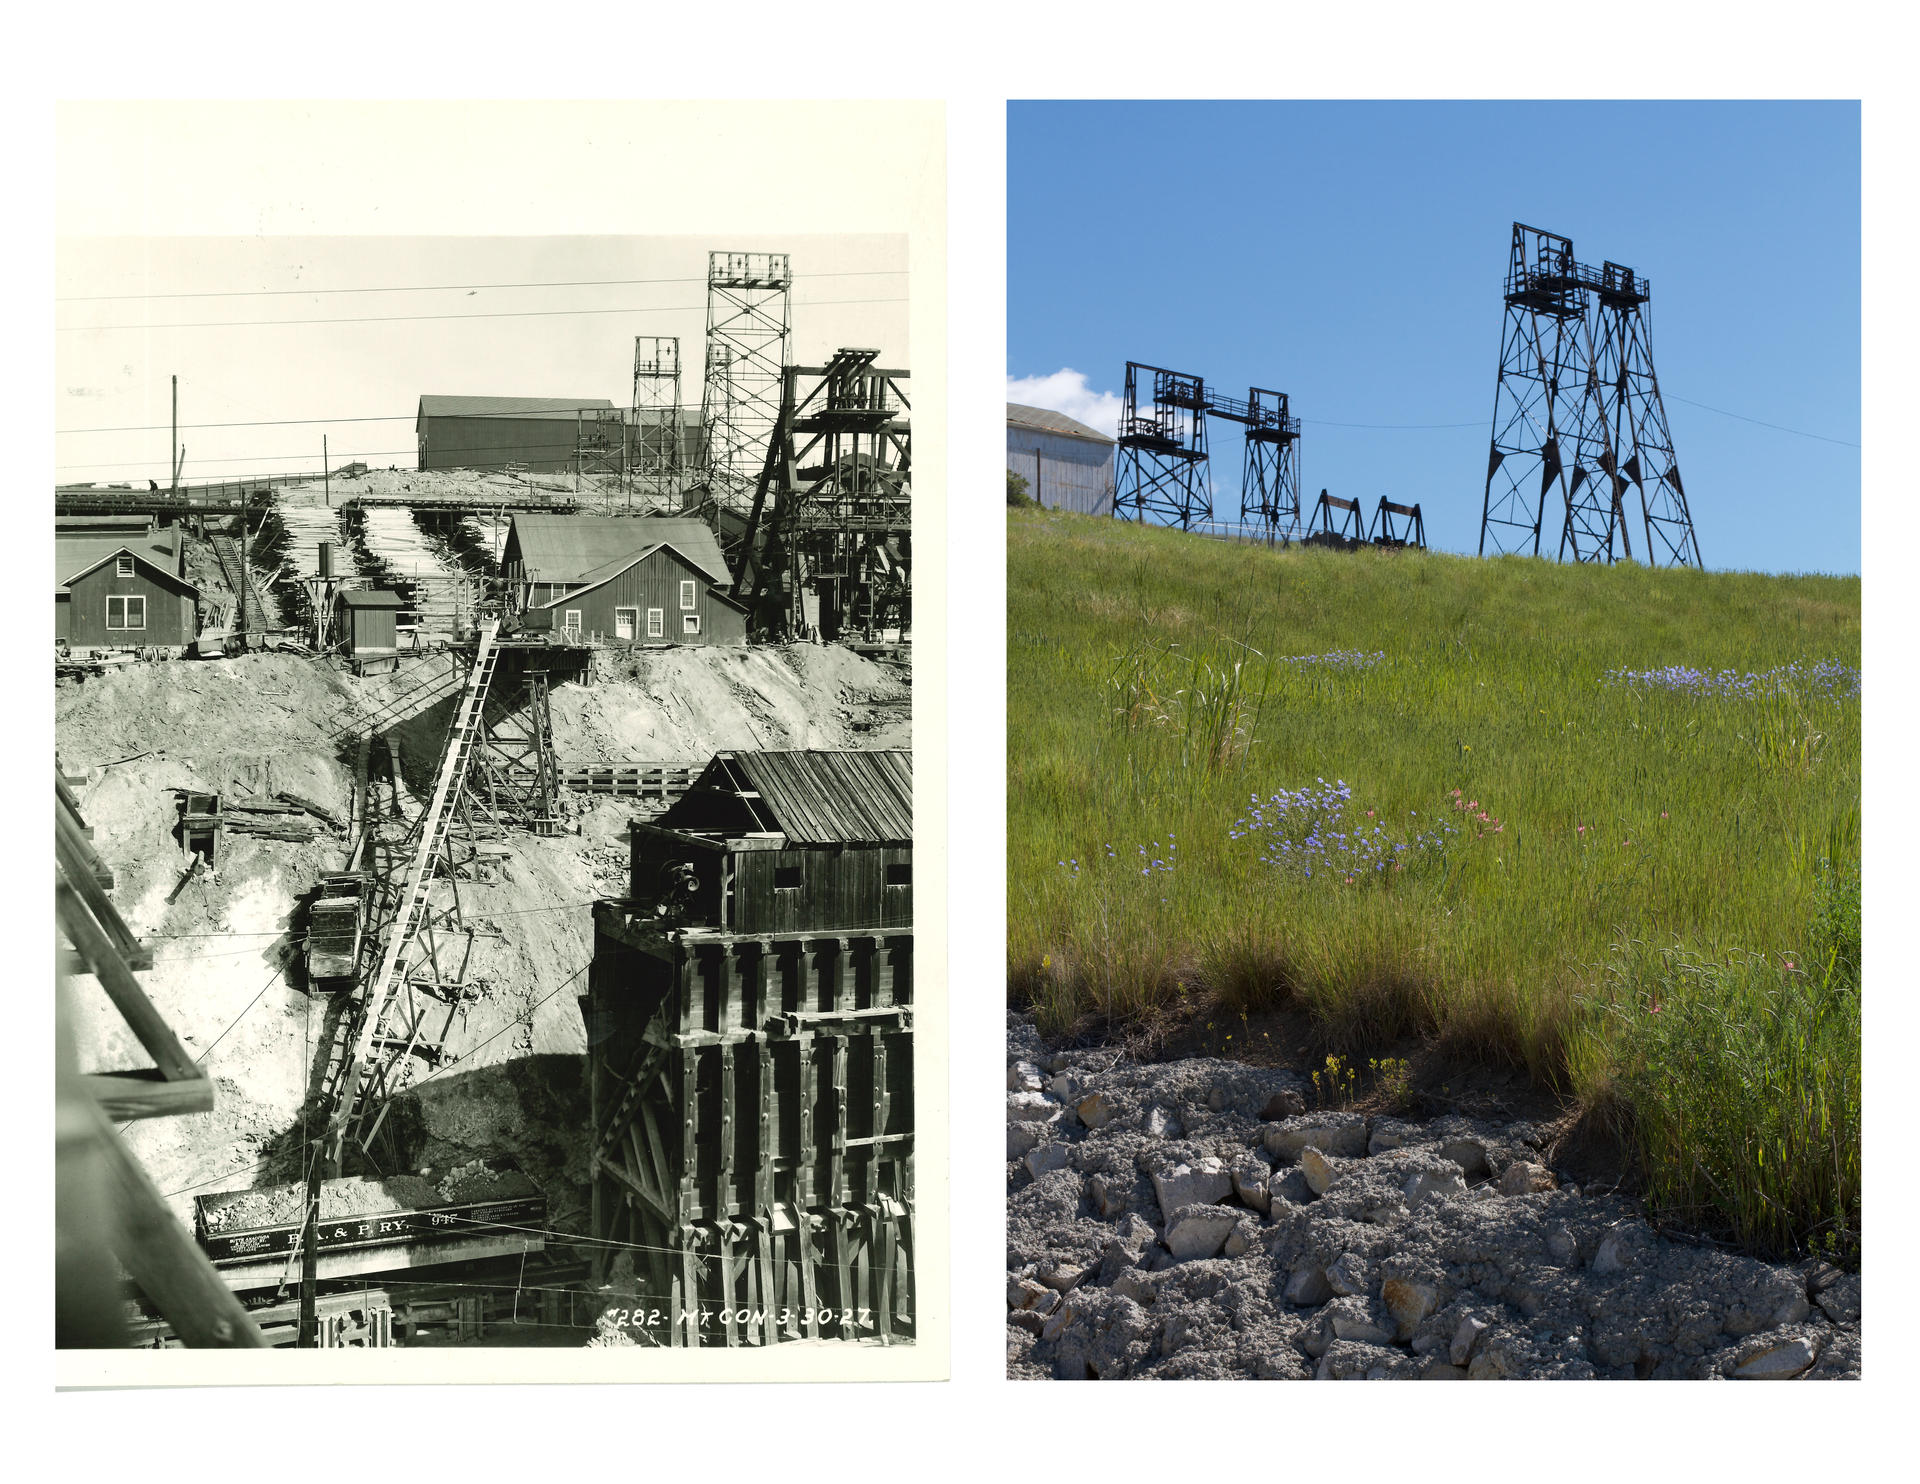 Two photographs taken roughly one century apart depicting the Mountain Con headframe, one site of underground copper mining in Butte. The archival photo on the left, from the Anaconda Copper Mining Company Collection at Butte Silver-Bow Public Archives, shows the workscape where miners loaded copper ore onto BA&P railcars for transport to the smelter. There are various buildings and a large timber reserve. The contemporary DSLR photograph on the right looks up from below at the headframe and the remediated 